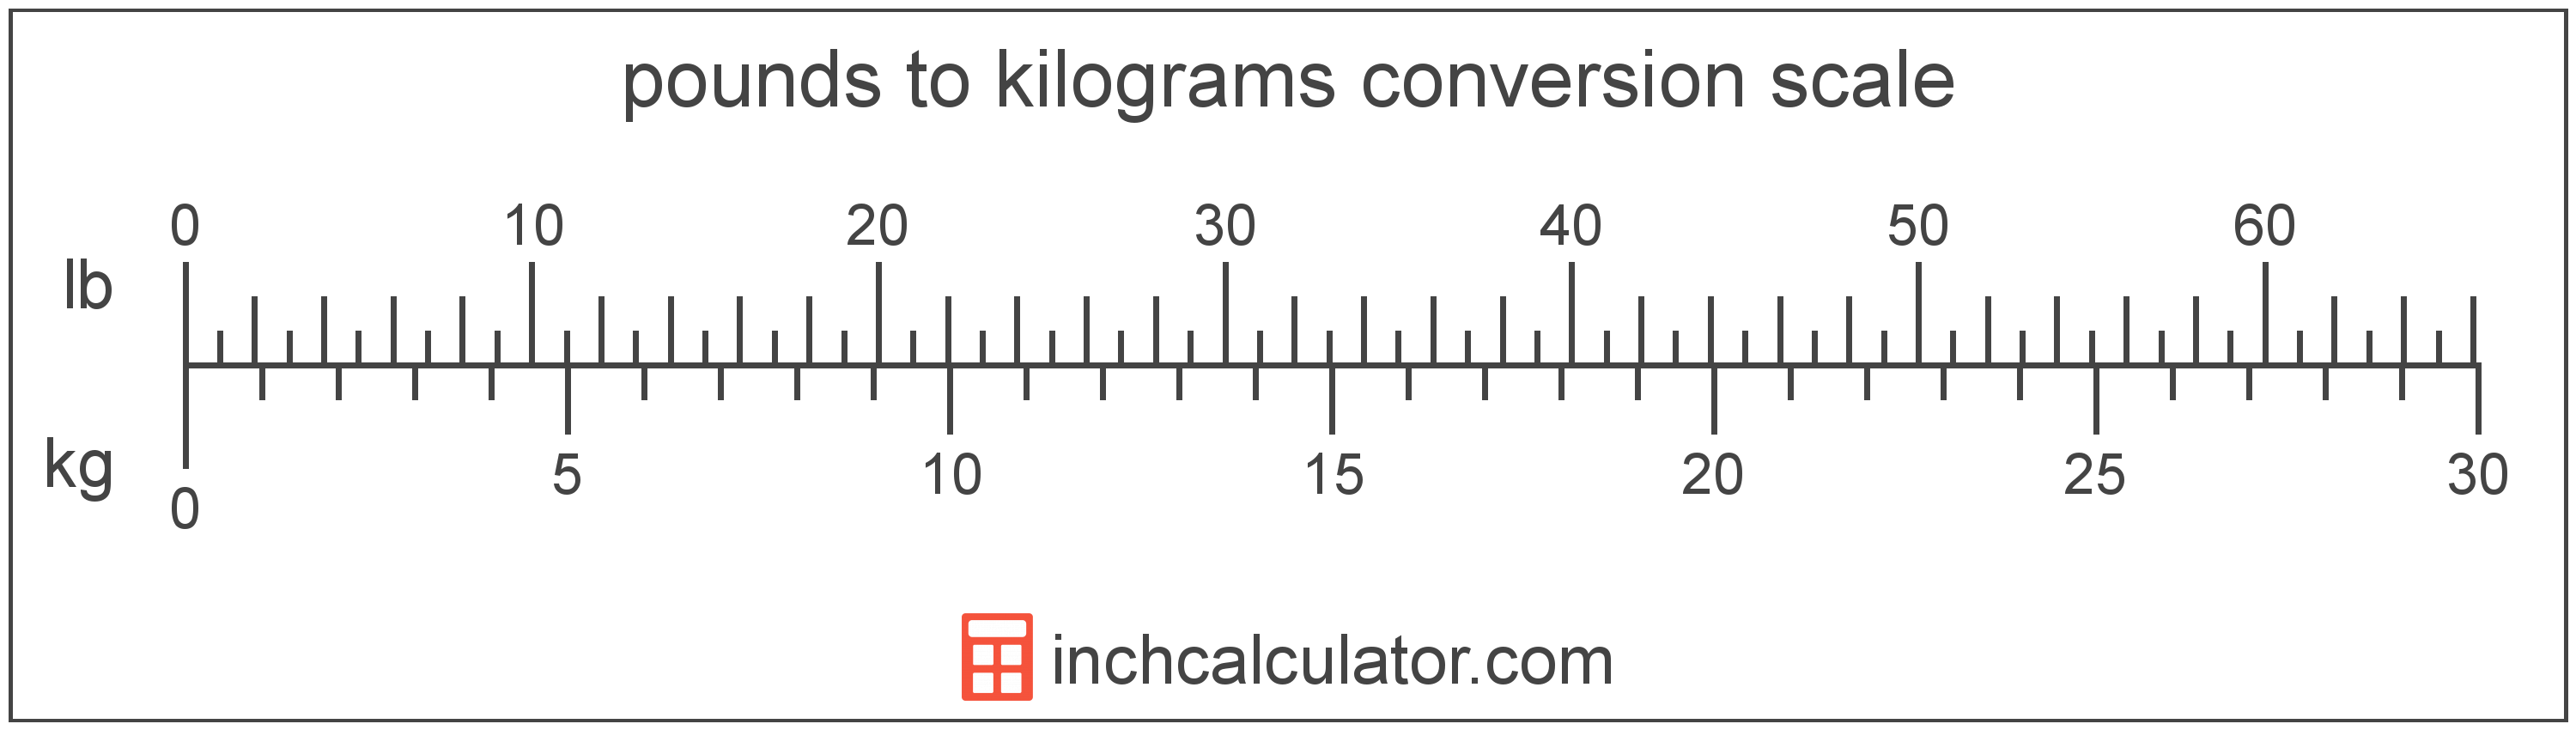 conversion scale showing weight in pounds and equivalent value in kilograms